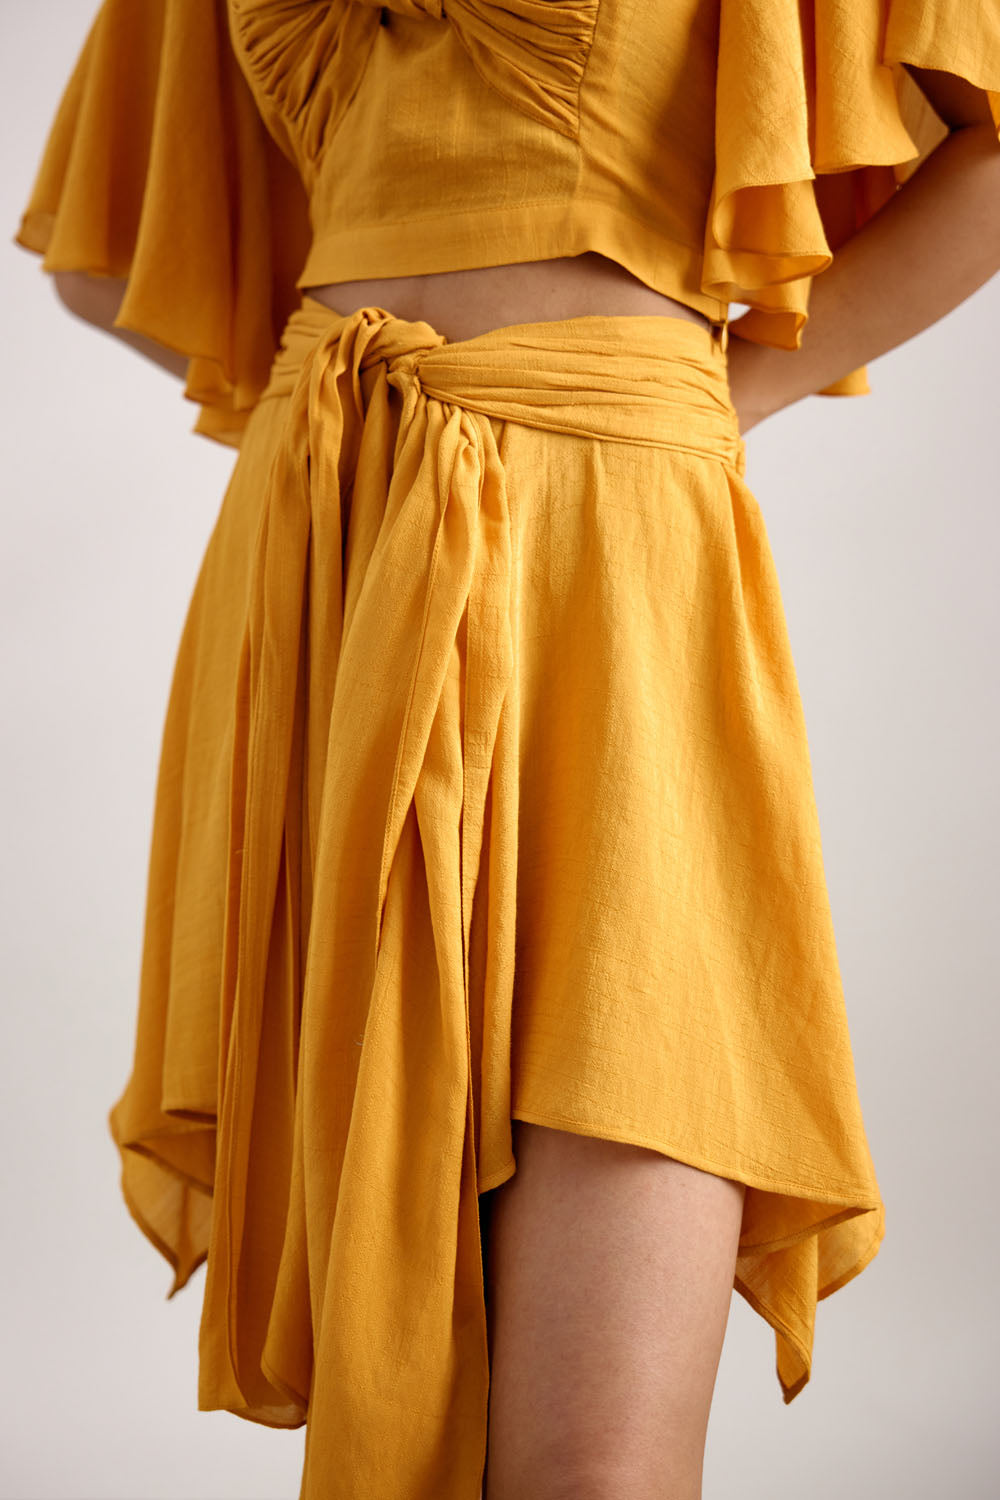 Knotted Top and Draped Skirt